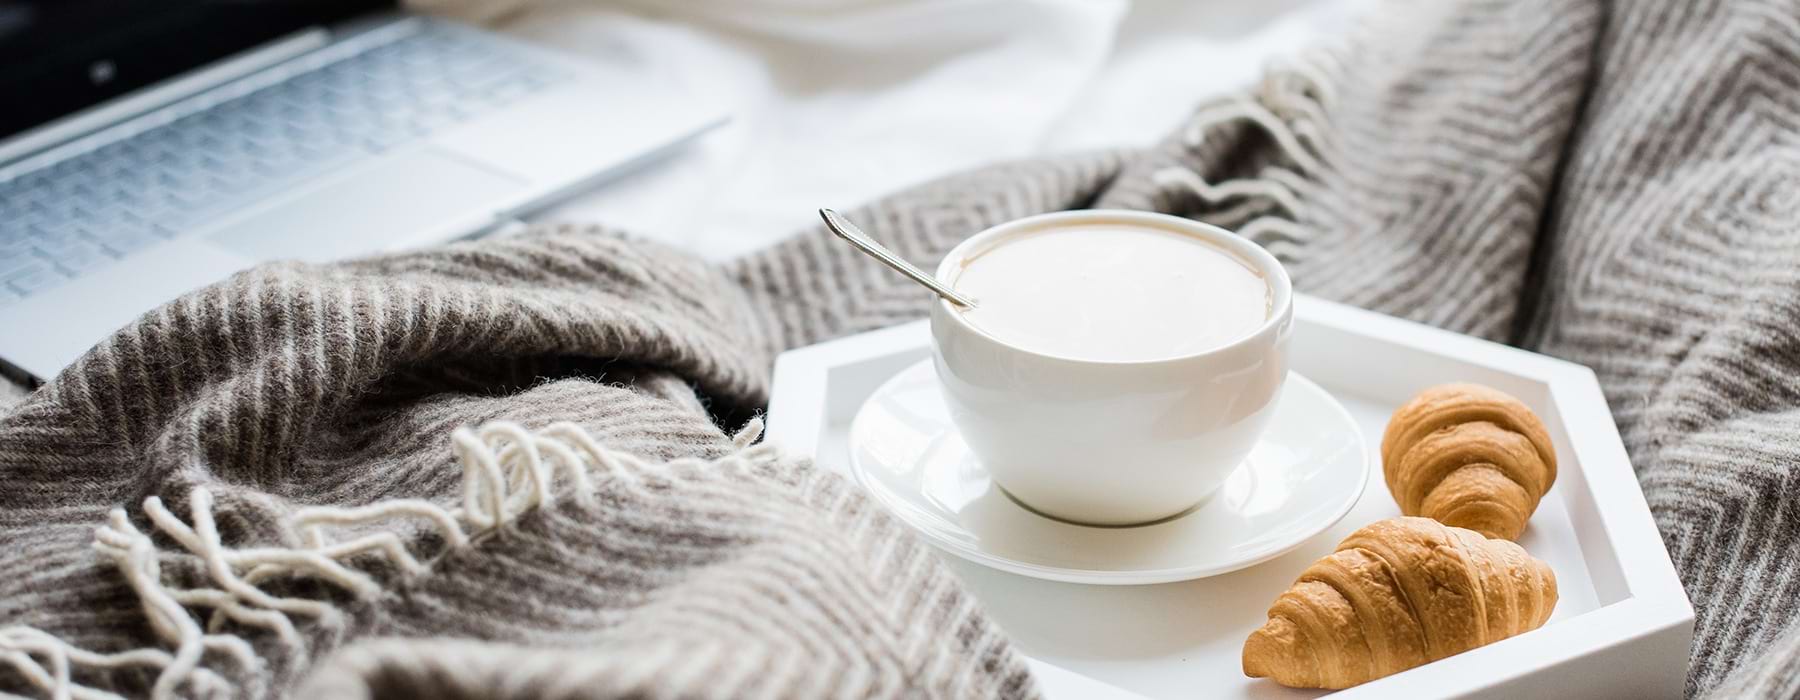 lifestyle image of a mug of coffee, a couple of croissants and a grey blanket